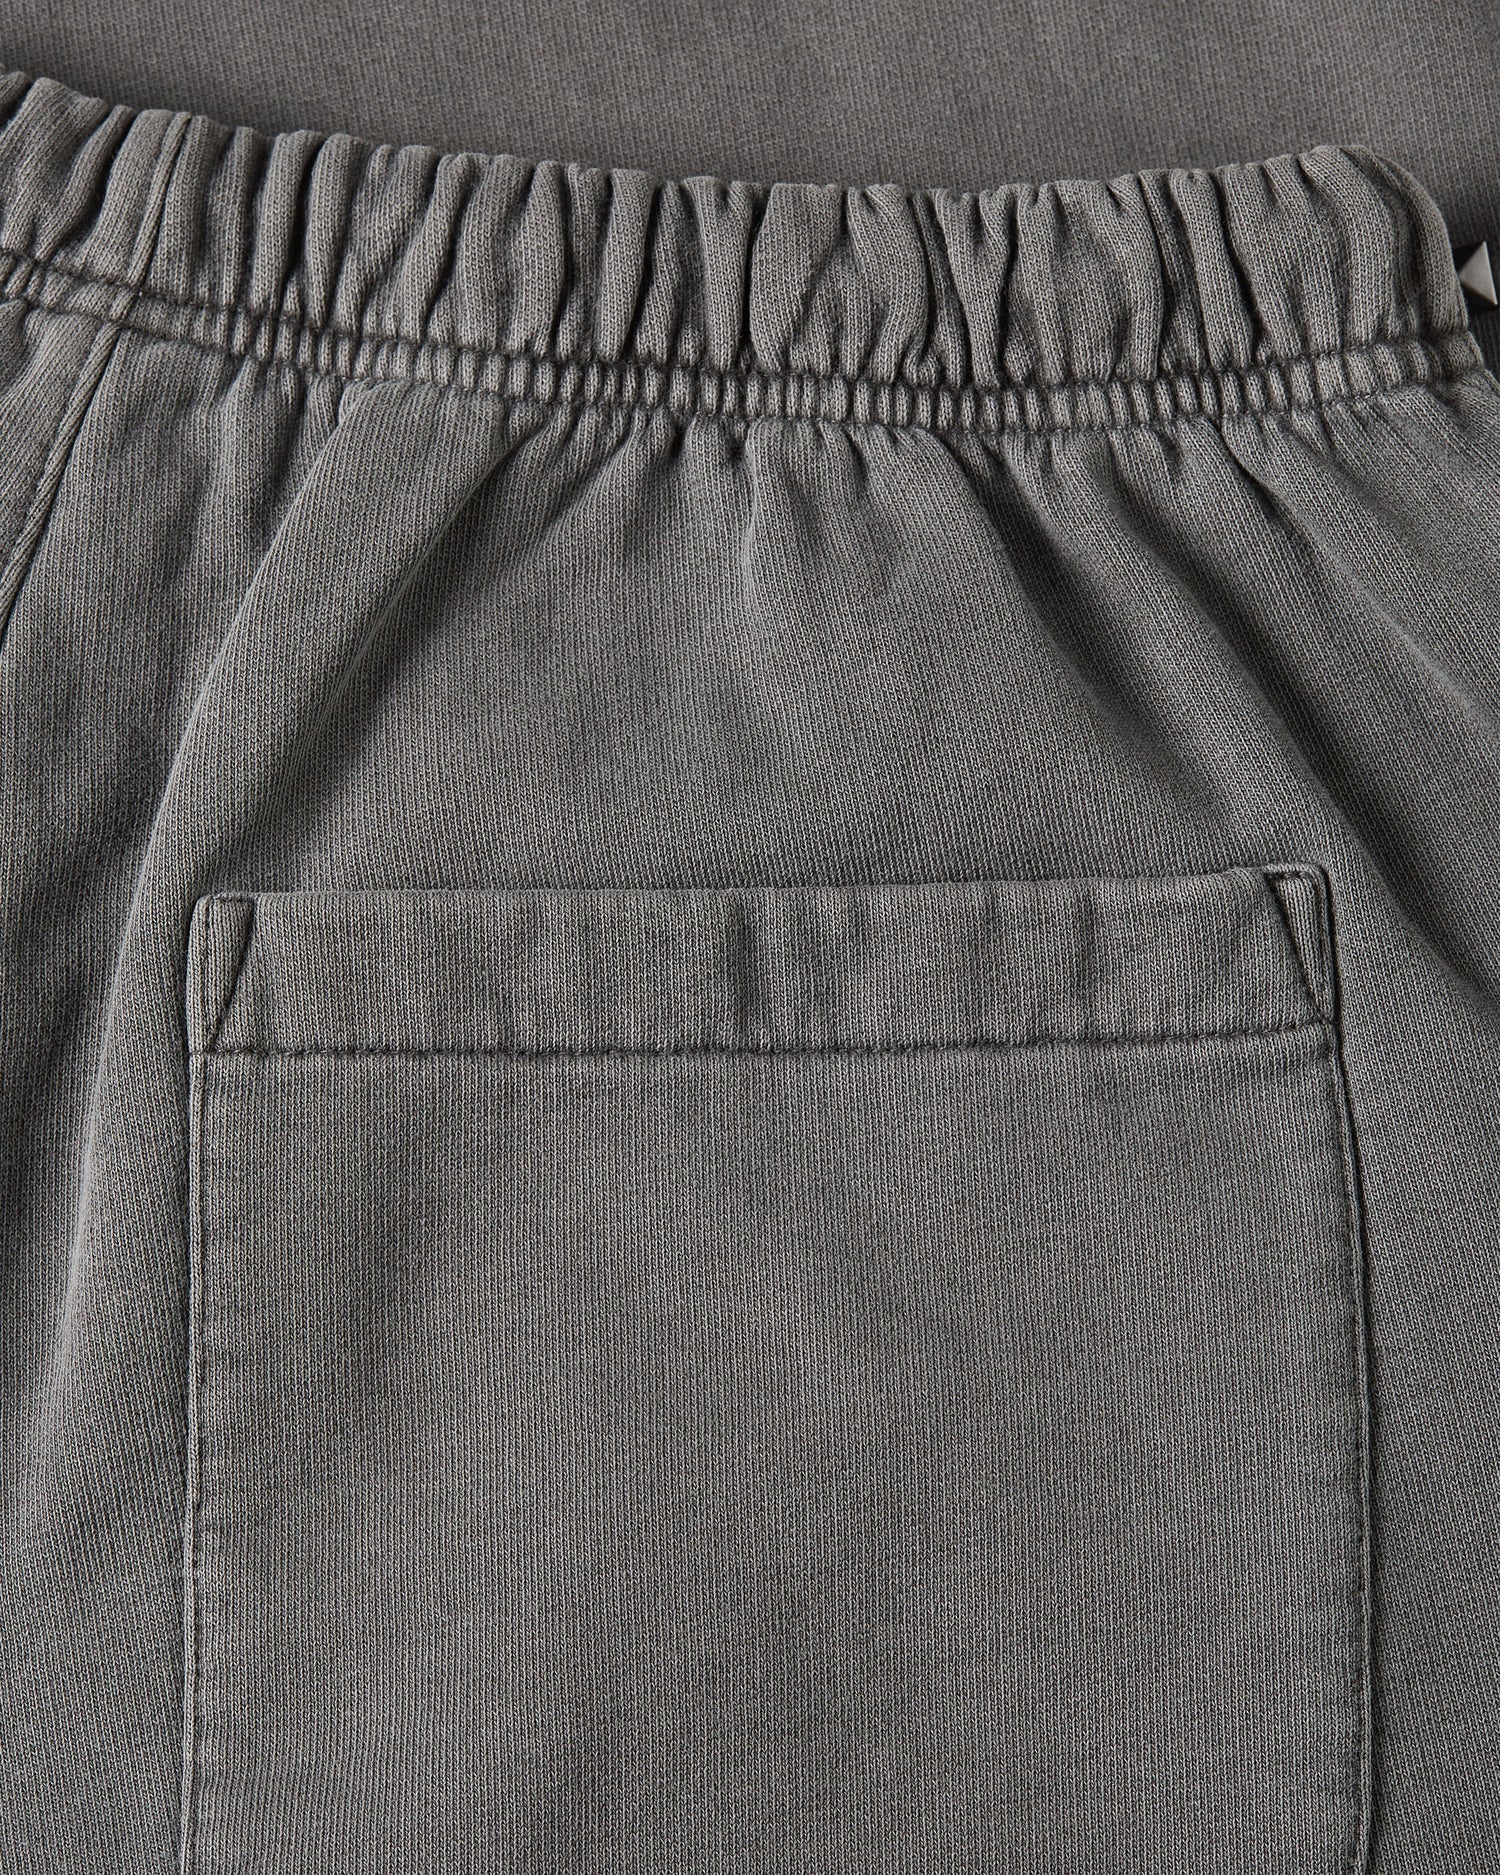 Patta Studded Washed Jogging Pants (Volcanic Glass)